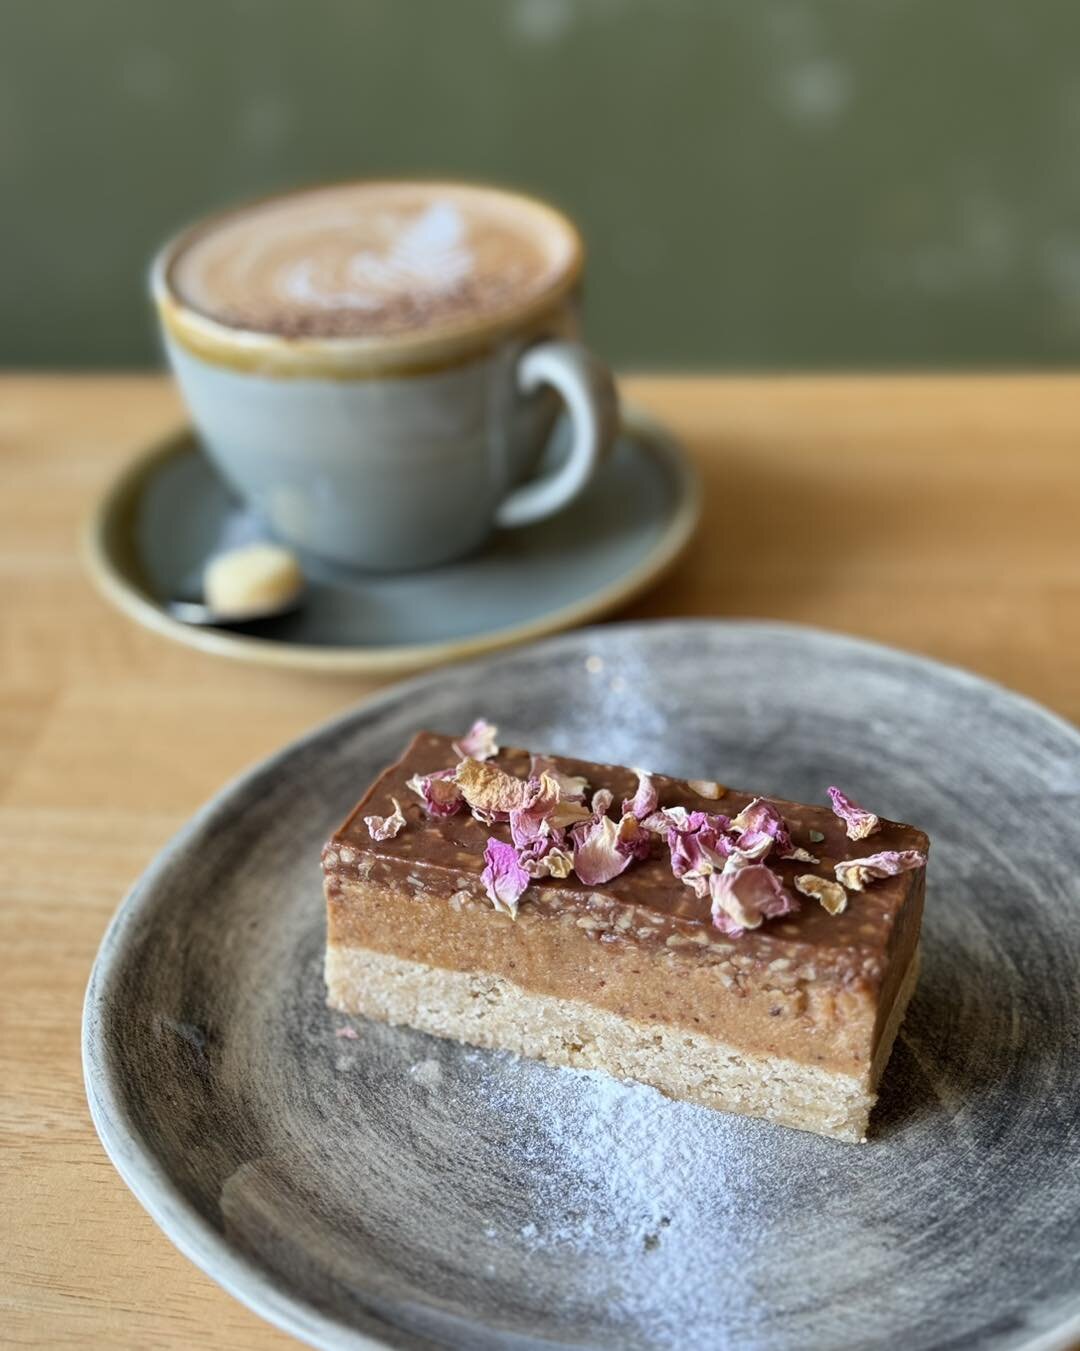 Afternoon Delight 🤎 Hazelnut Bueno Slice with a Cappuccino
.
.
.
#coffee #afternoonsnack #vegan #cappuccino